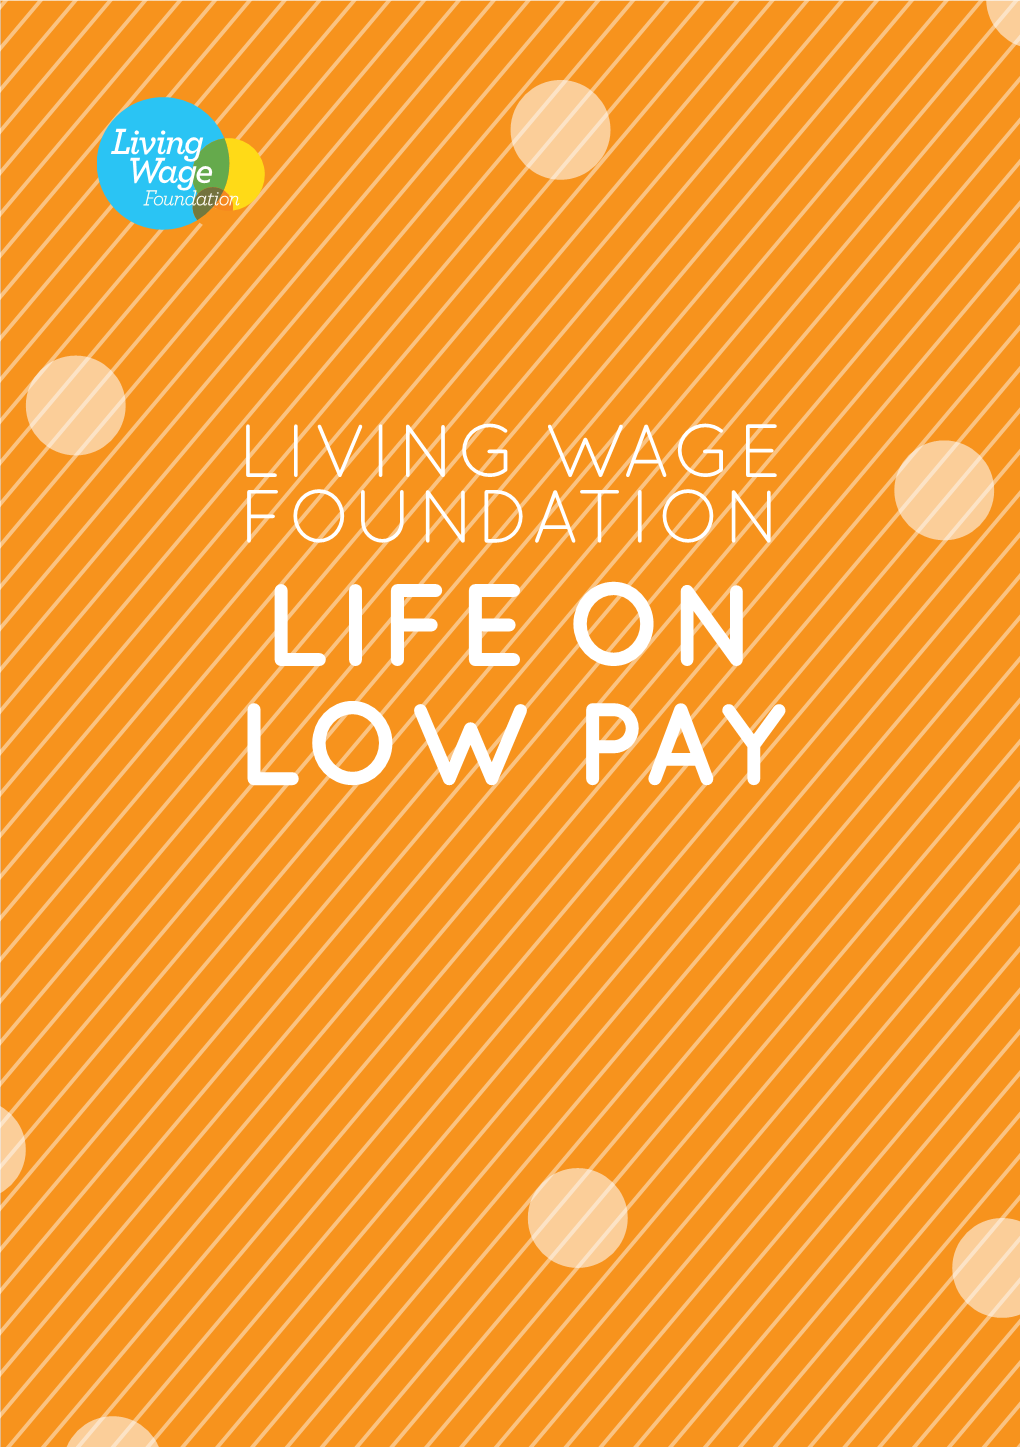 Life on Low Pay Life on Low Pay Key Findings